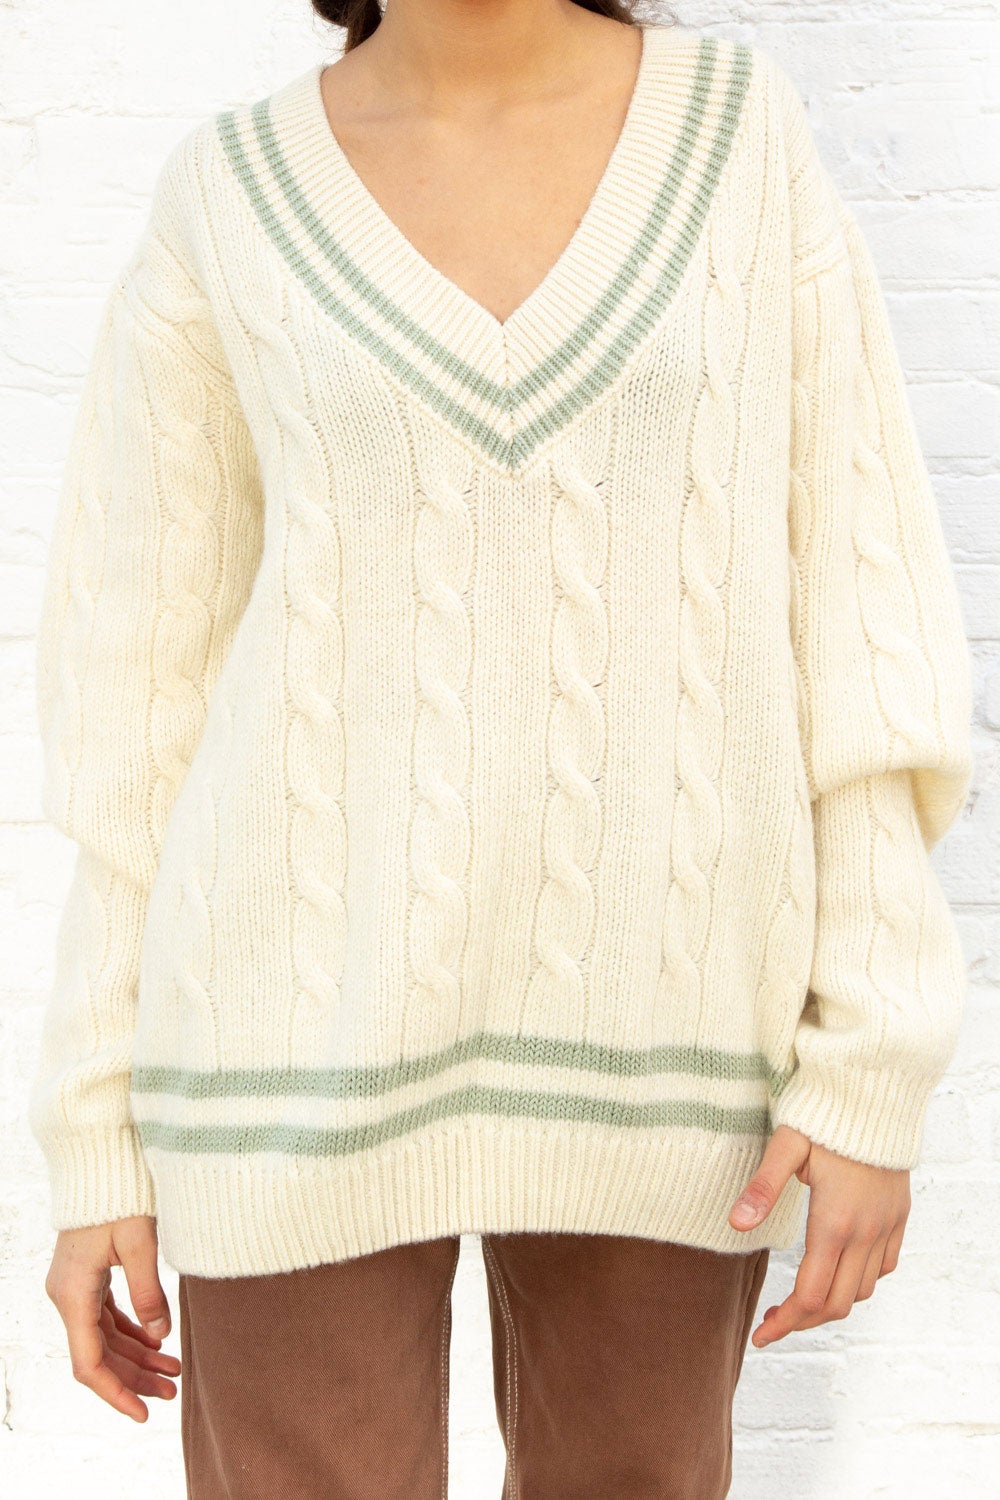 Ivory and Sage Knit / Oversized Fit